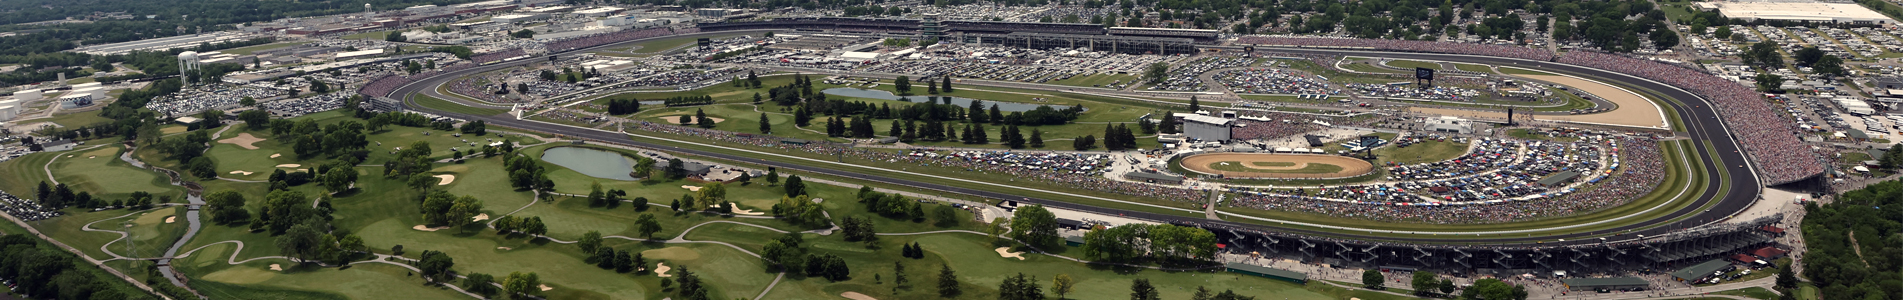 An overall view of Indianapolis Motor Speedway during the 2023 Indianapolis 500